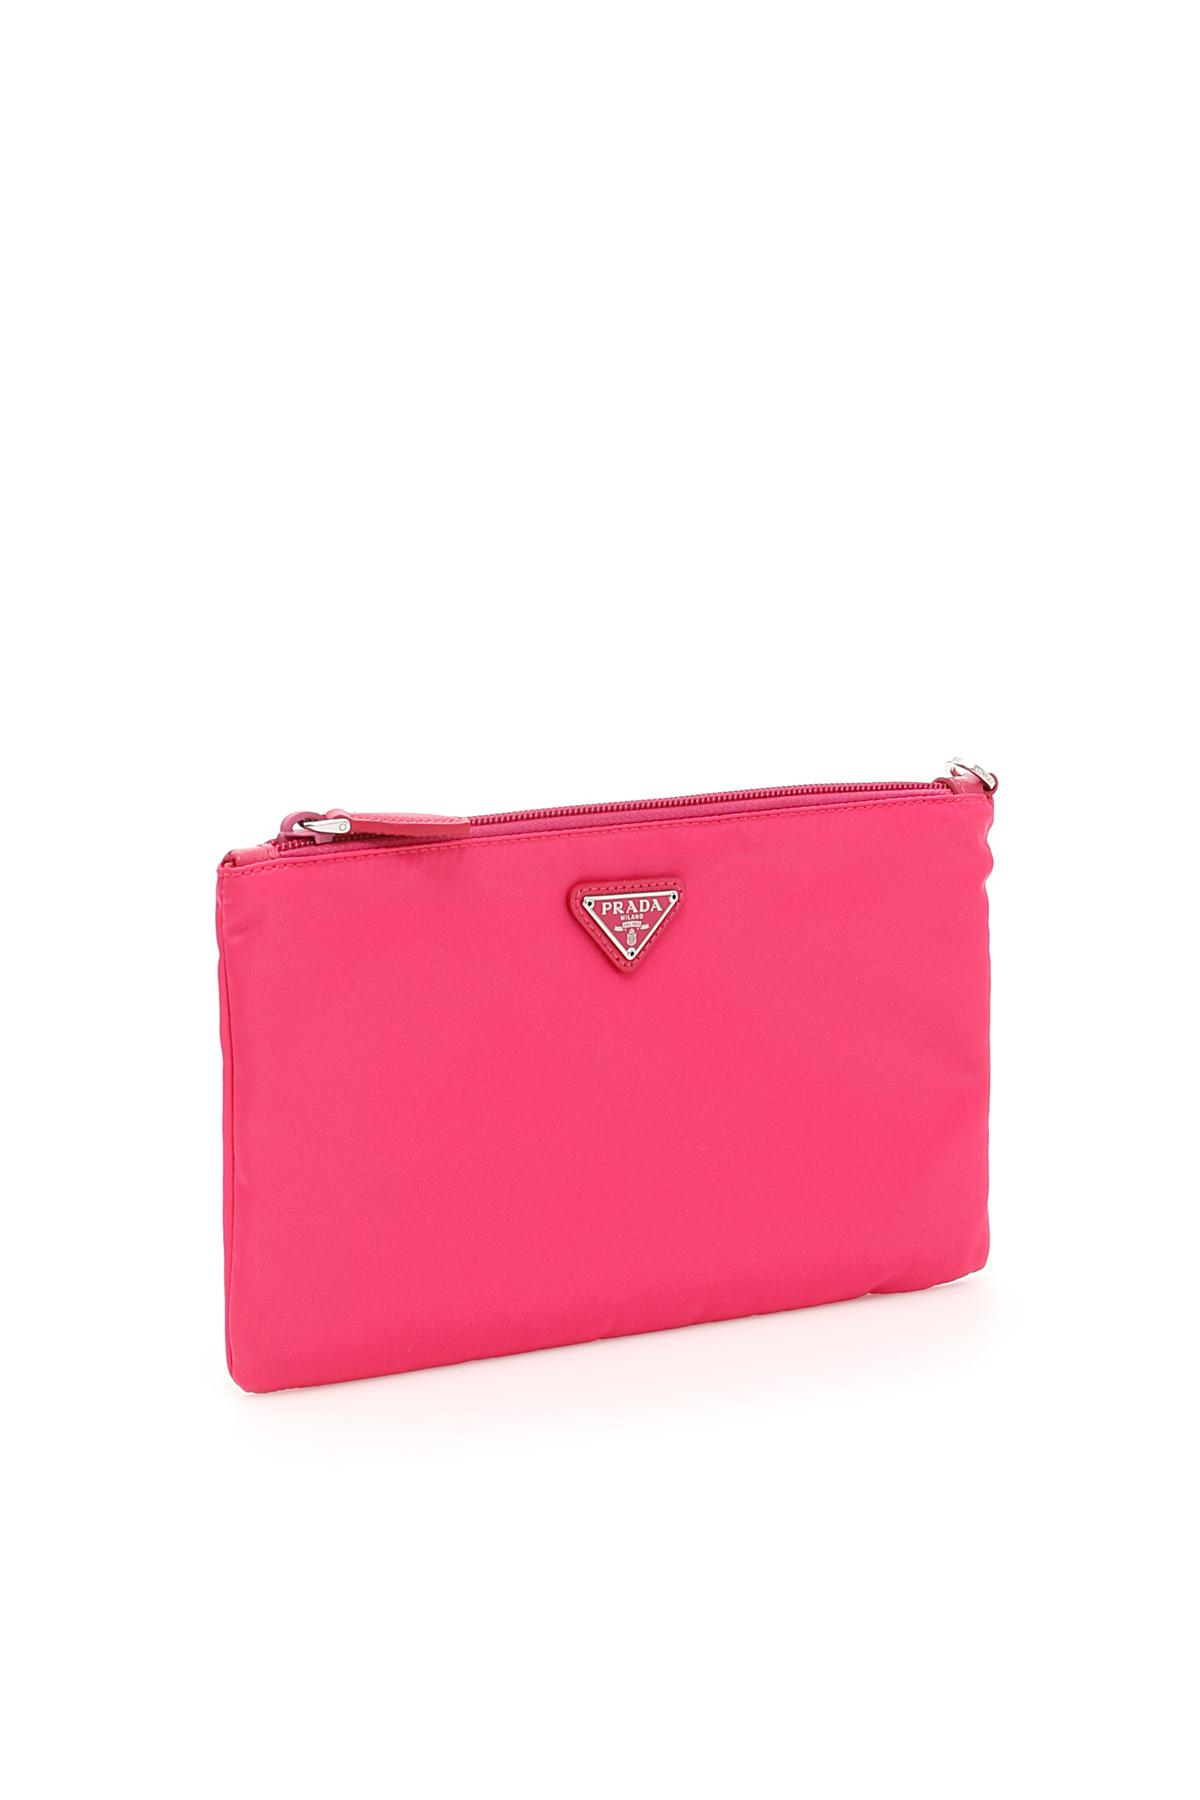 Prada Synthetic Nylon Flat Pouch in Pink | Lyst